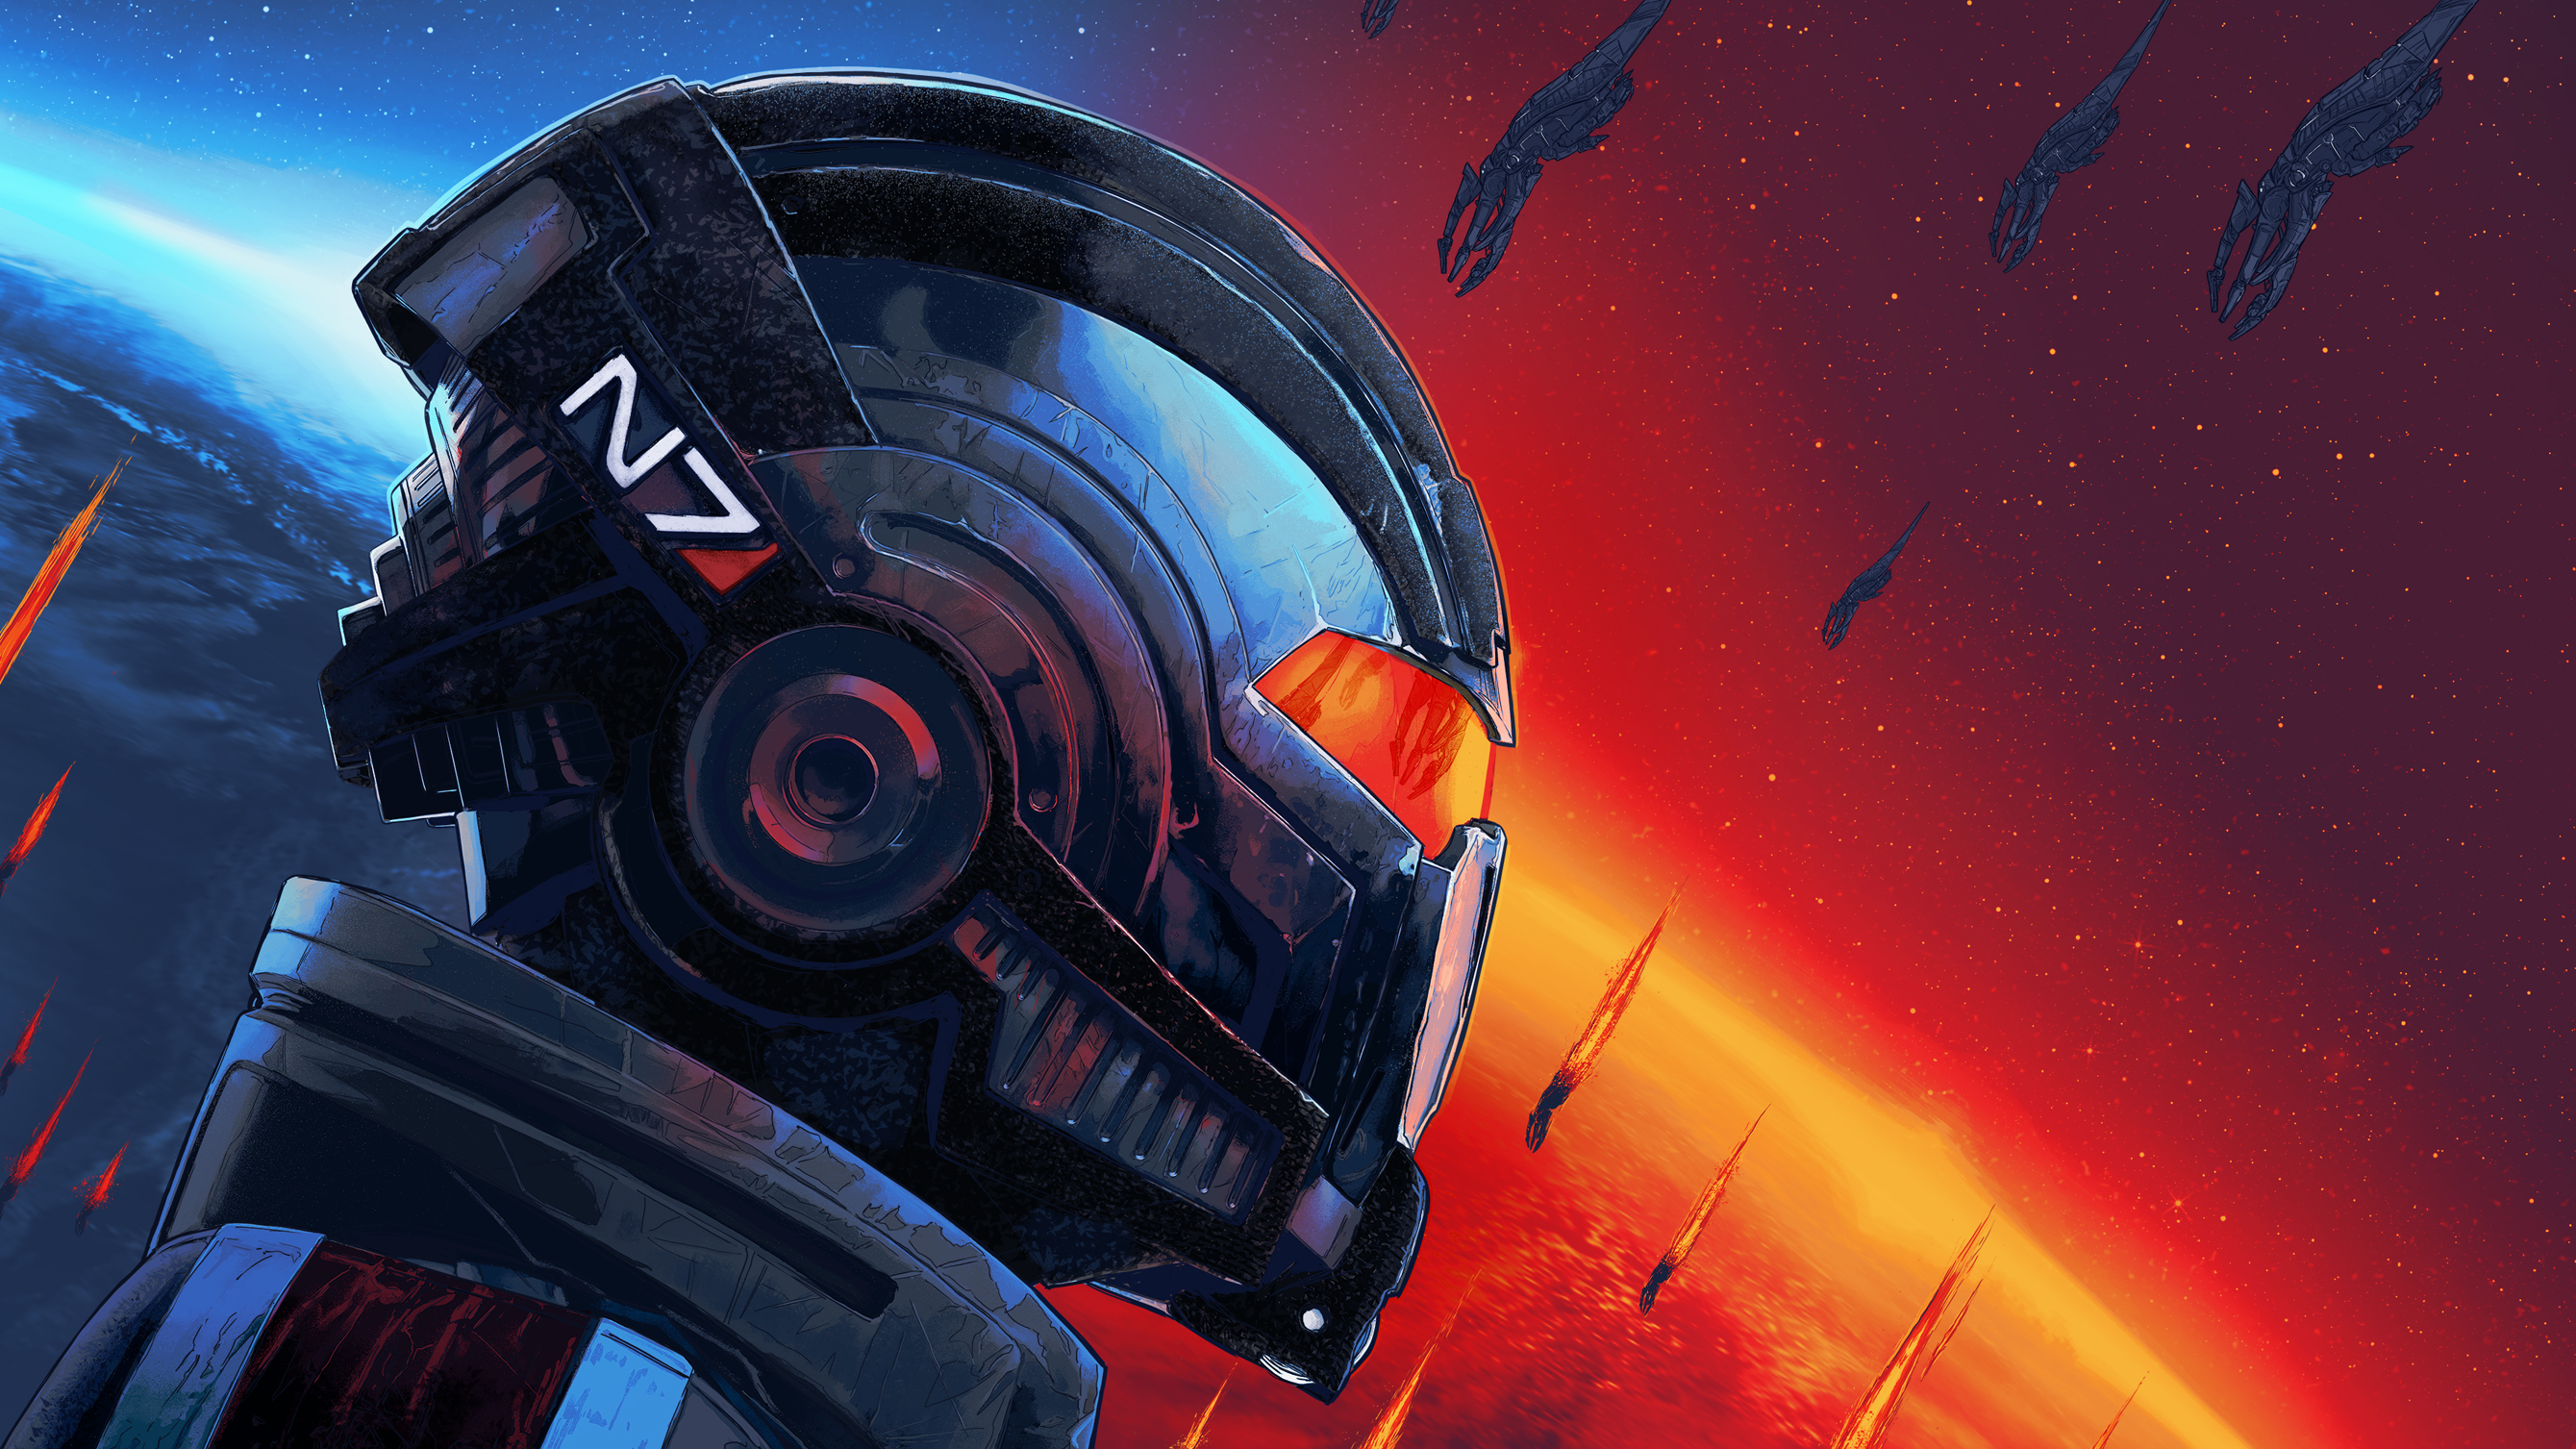 Remaster Trilogy Mass Effect Legendary Edition Now Included with